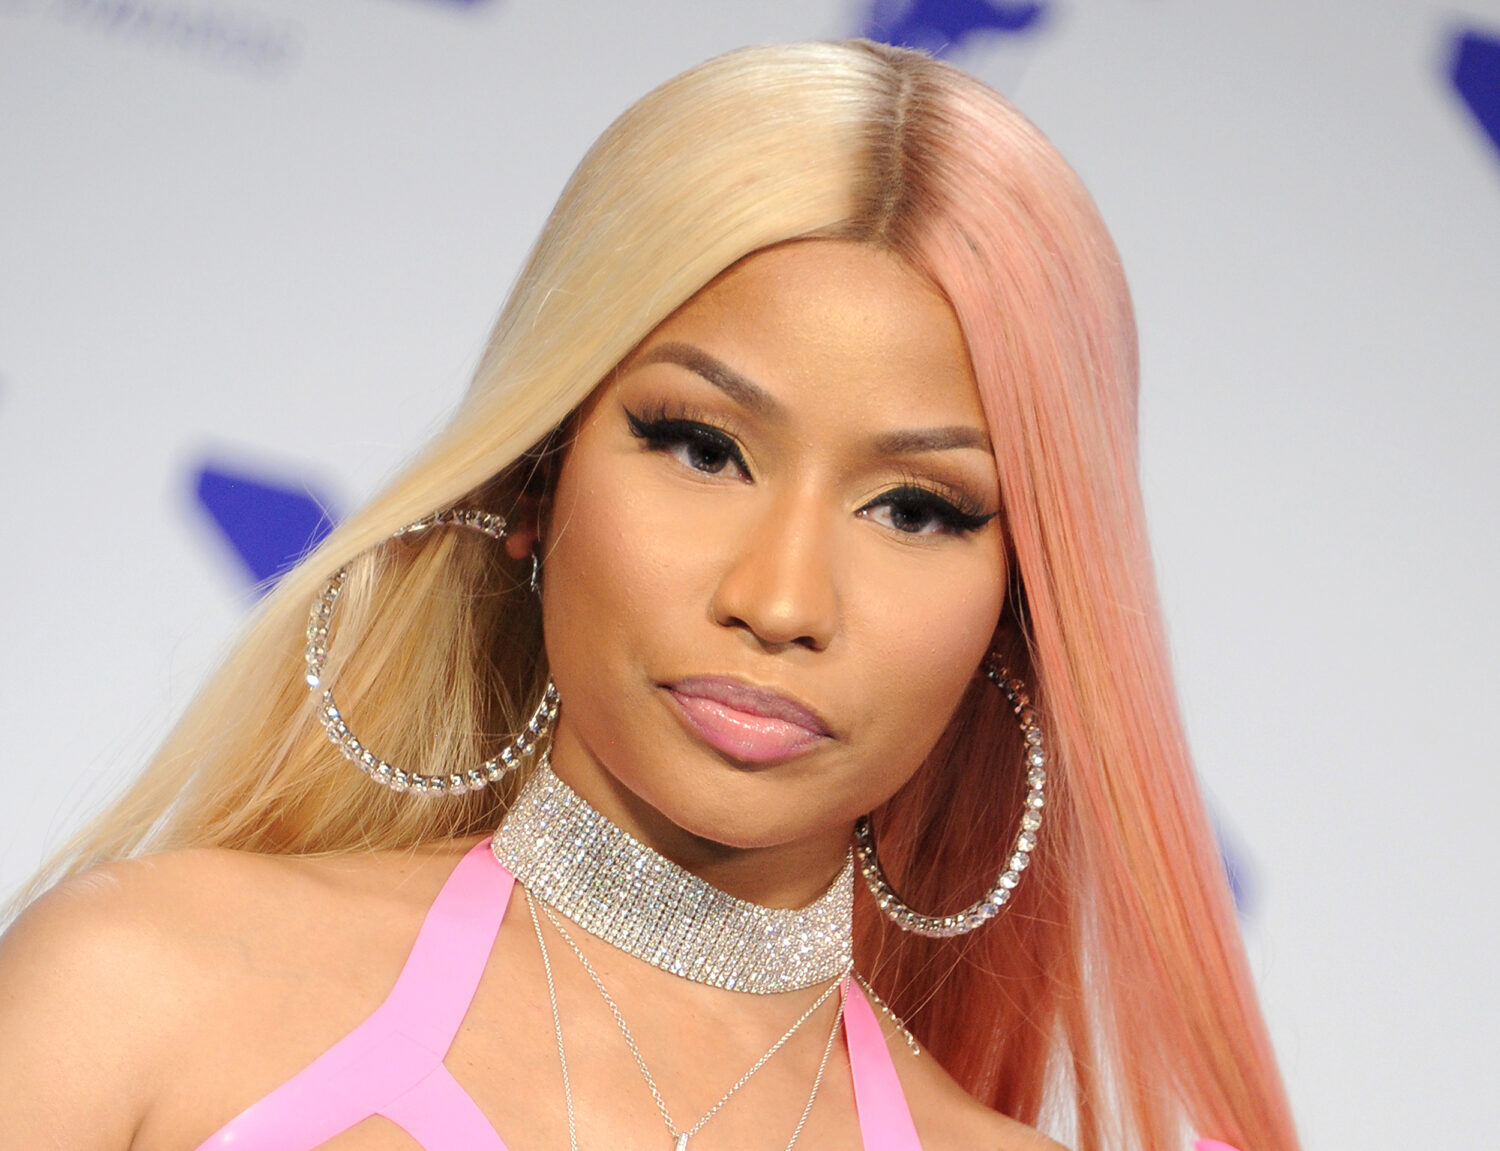 Nicki Minaj Calls Out Grammys For Moving ‘Super Freaky Girl’ From Rap To Pop